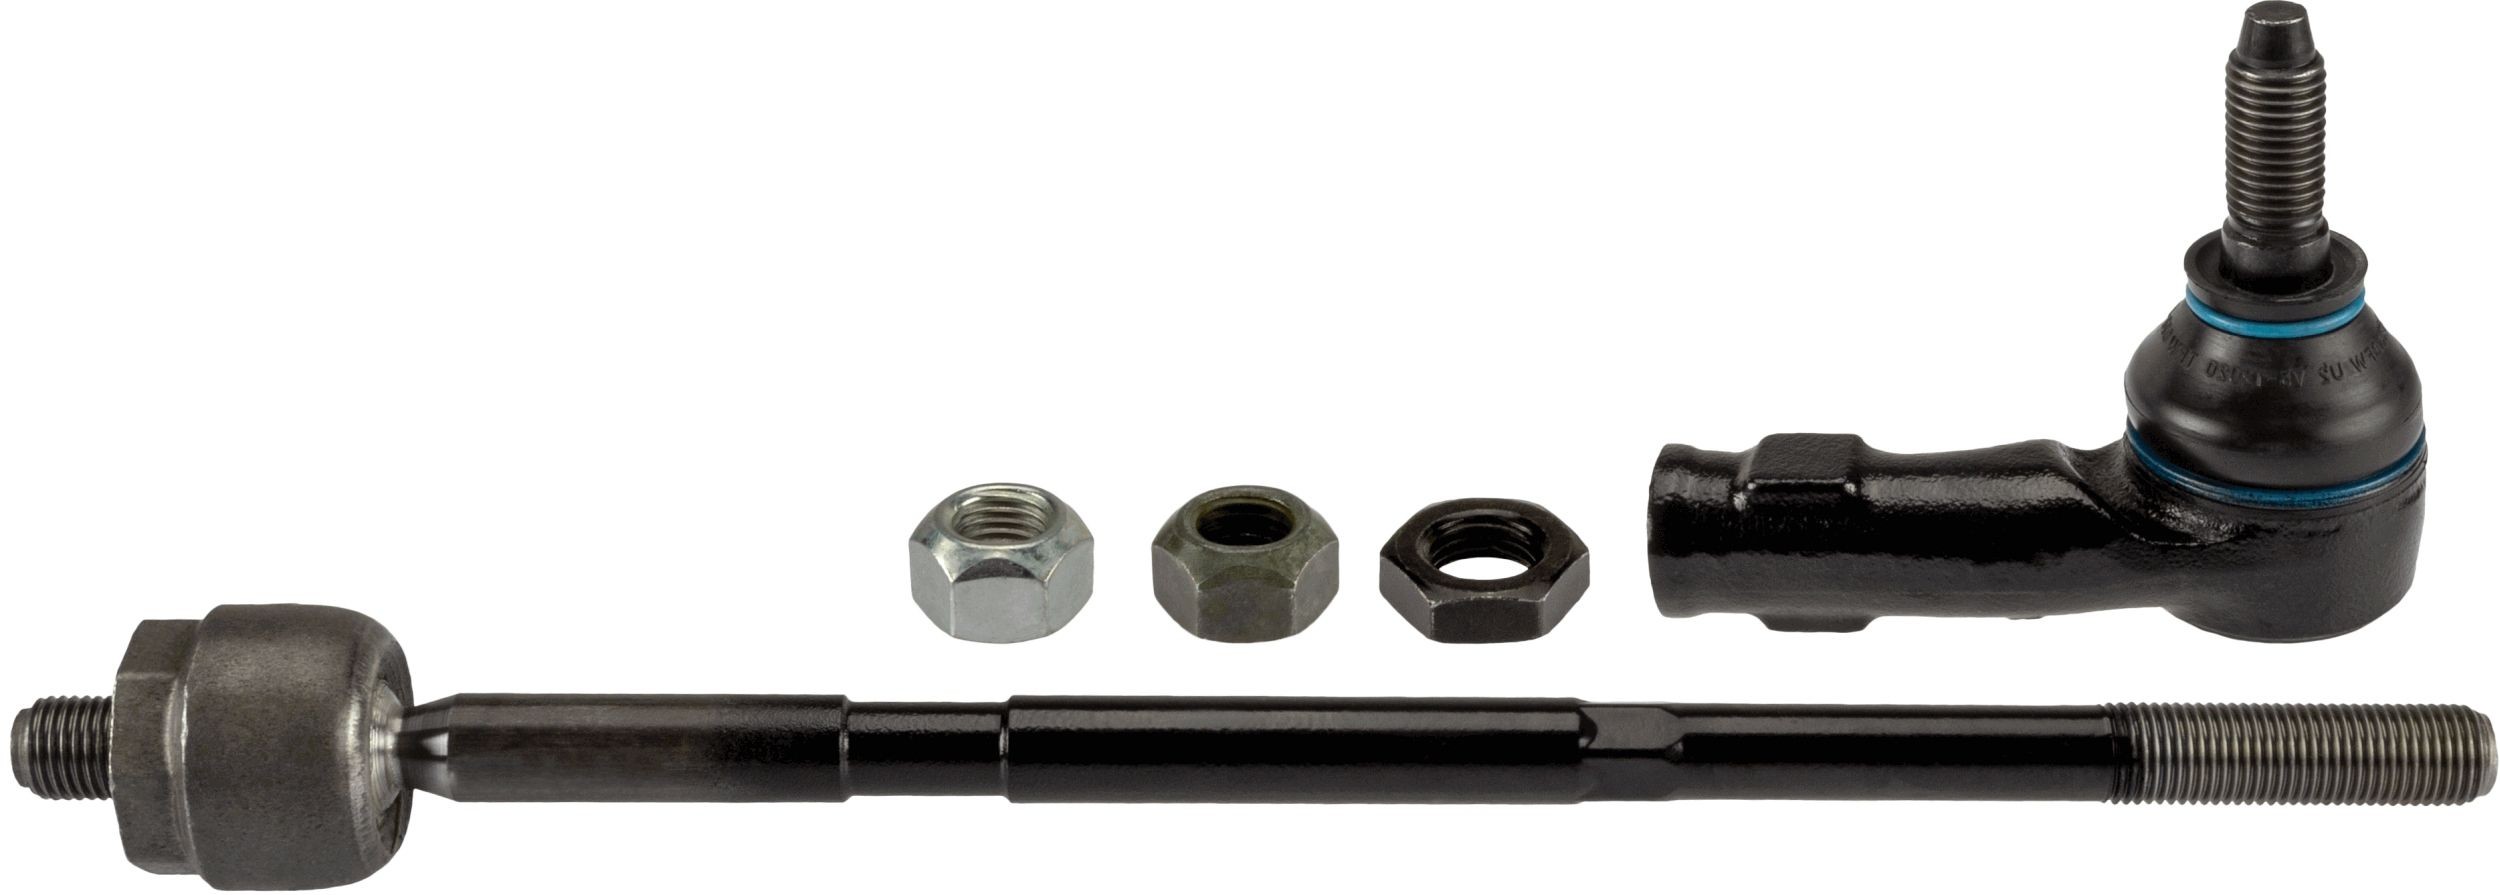 TRW JRA298 Rod Assembly with accessories